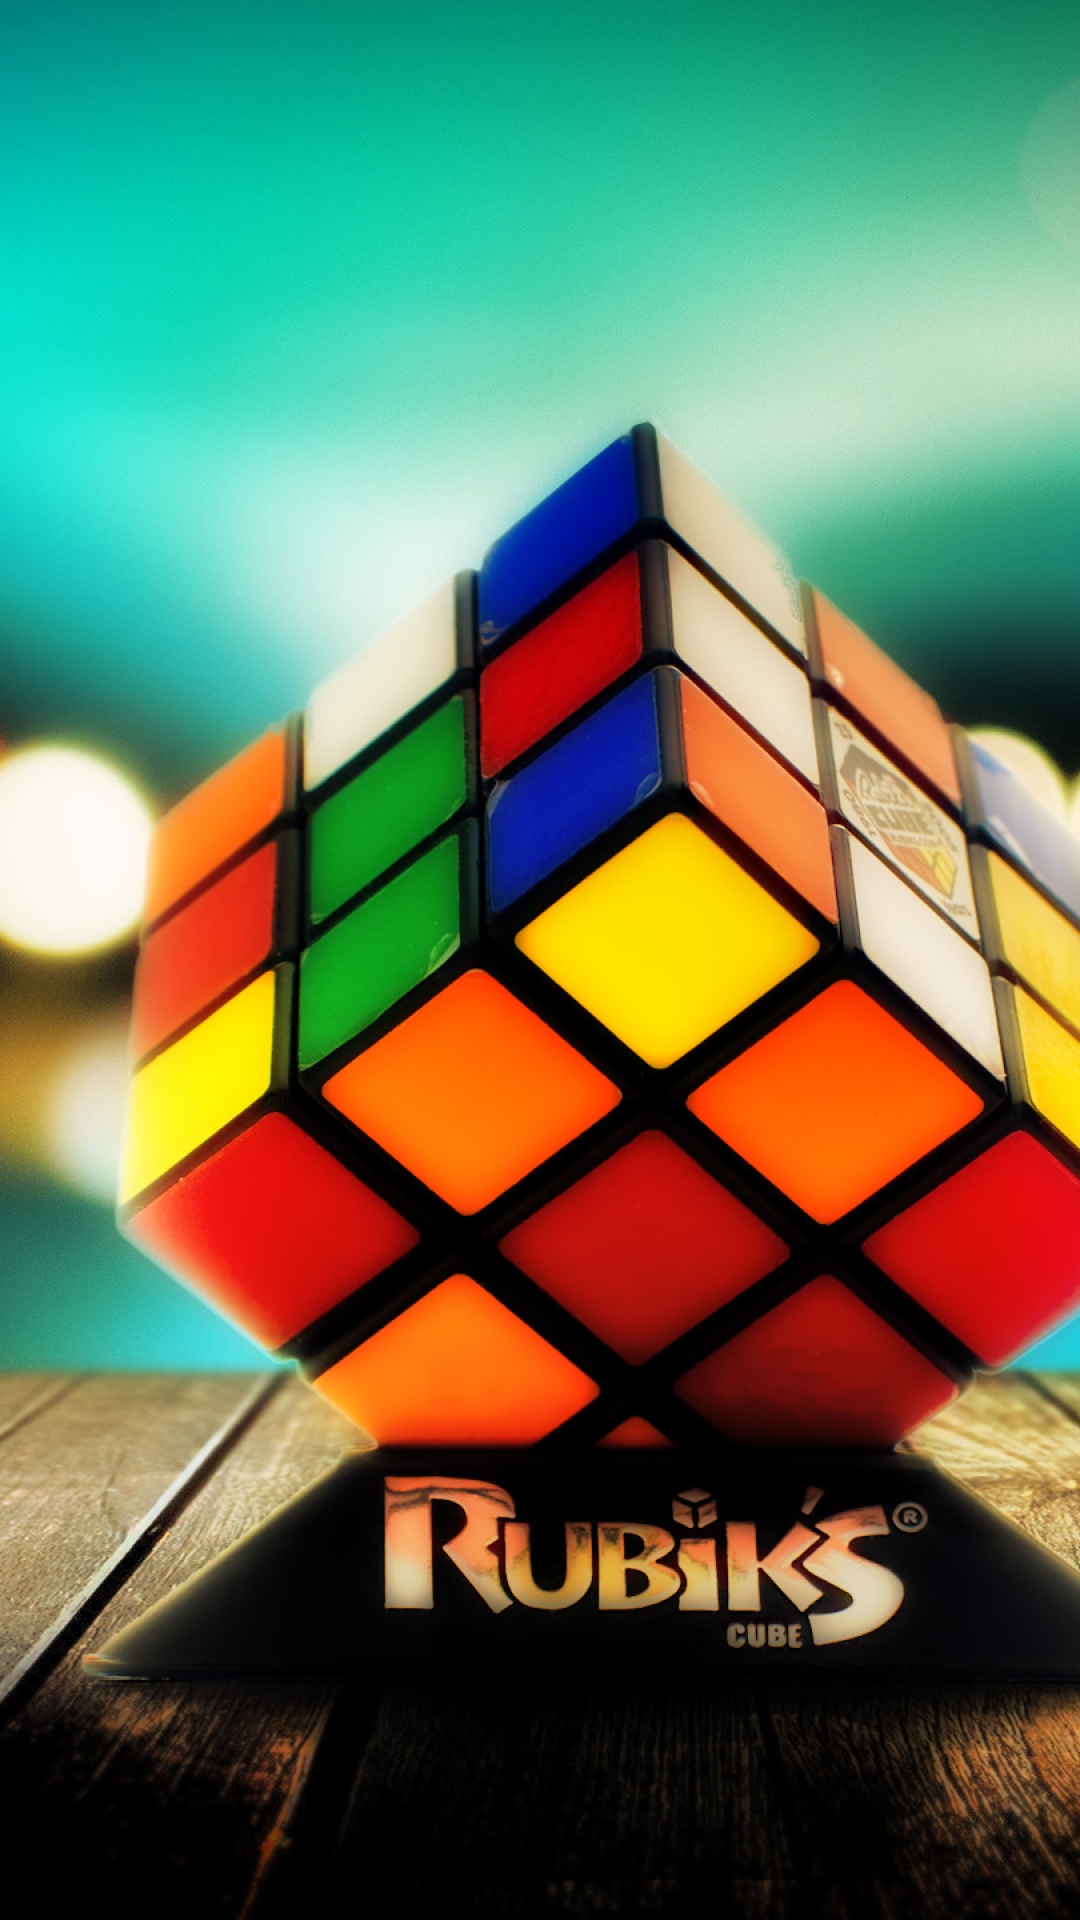 Rubiks Cube Iphone Wallpaper Iphone Wallpapers